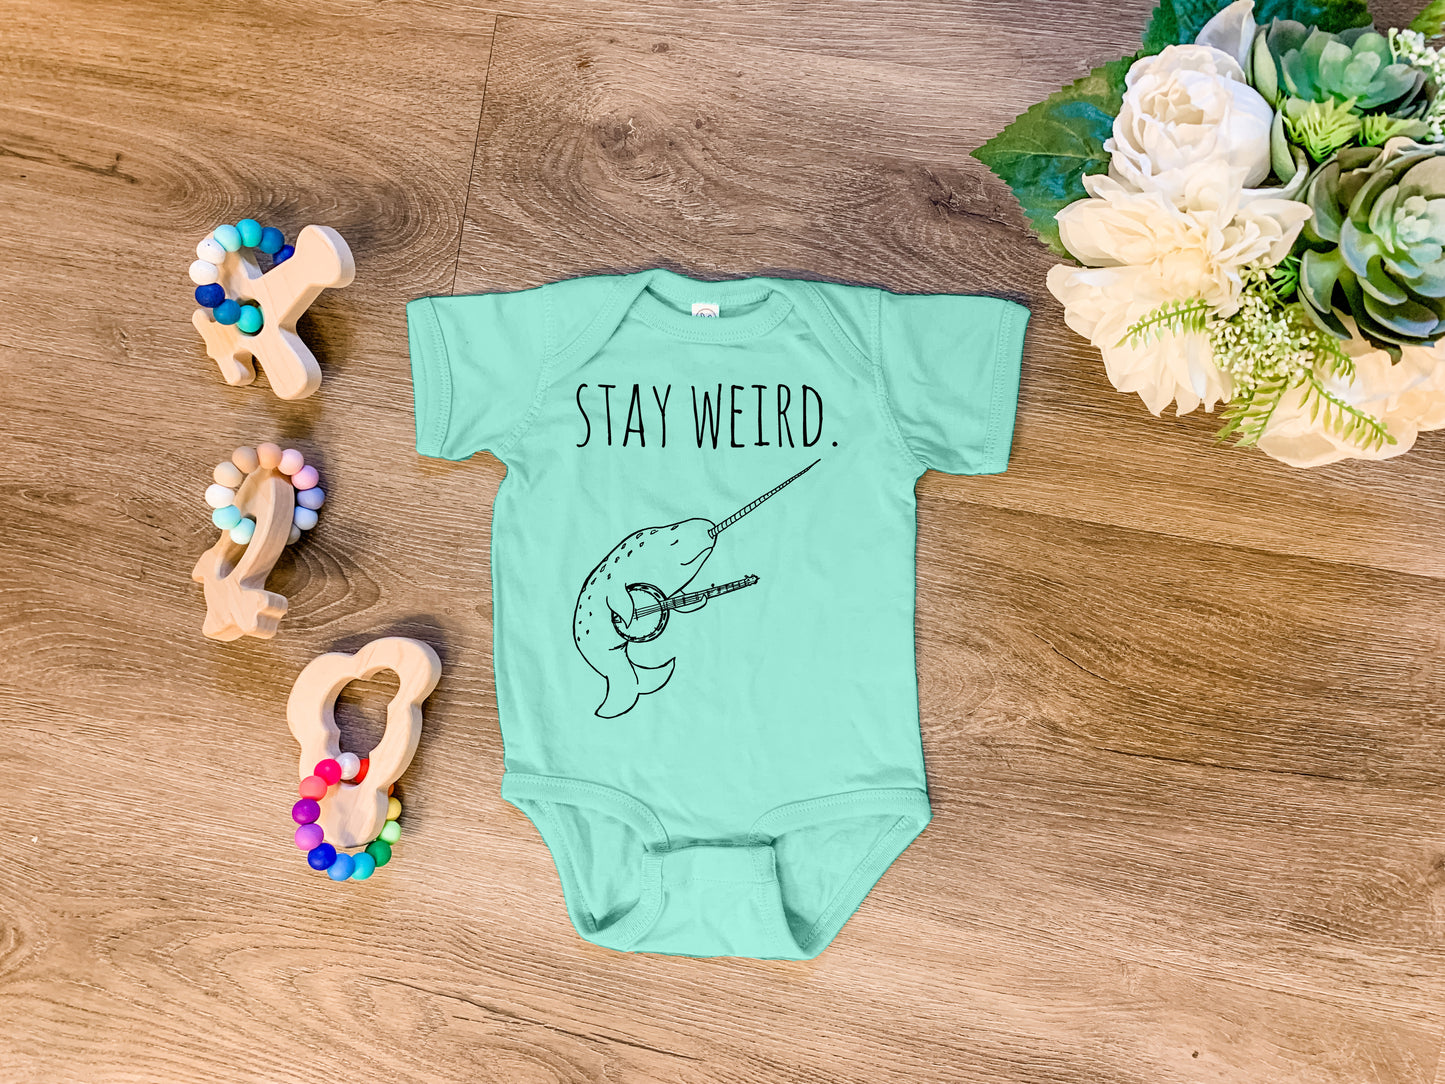 Stay Weird (Narwhal / Banjo) - Onesie - Heather Gray, Chill, or Lavender